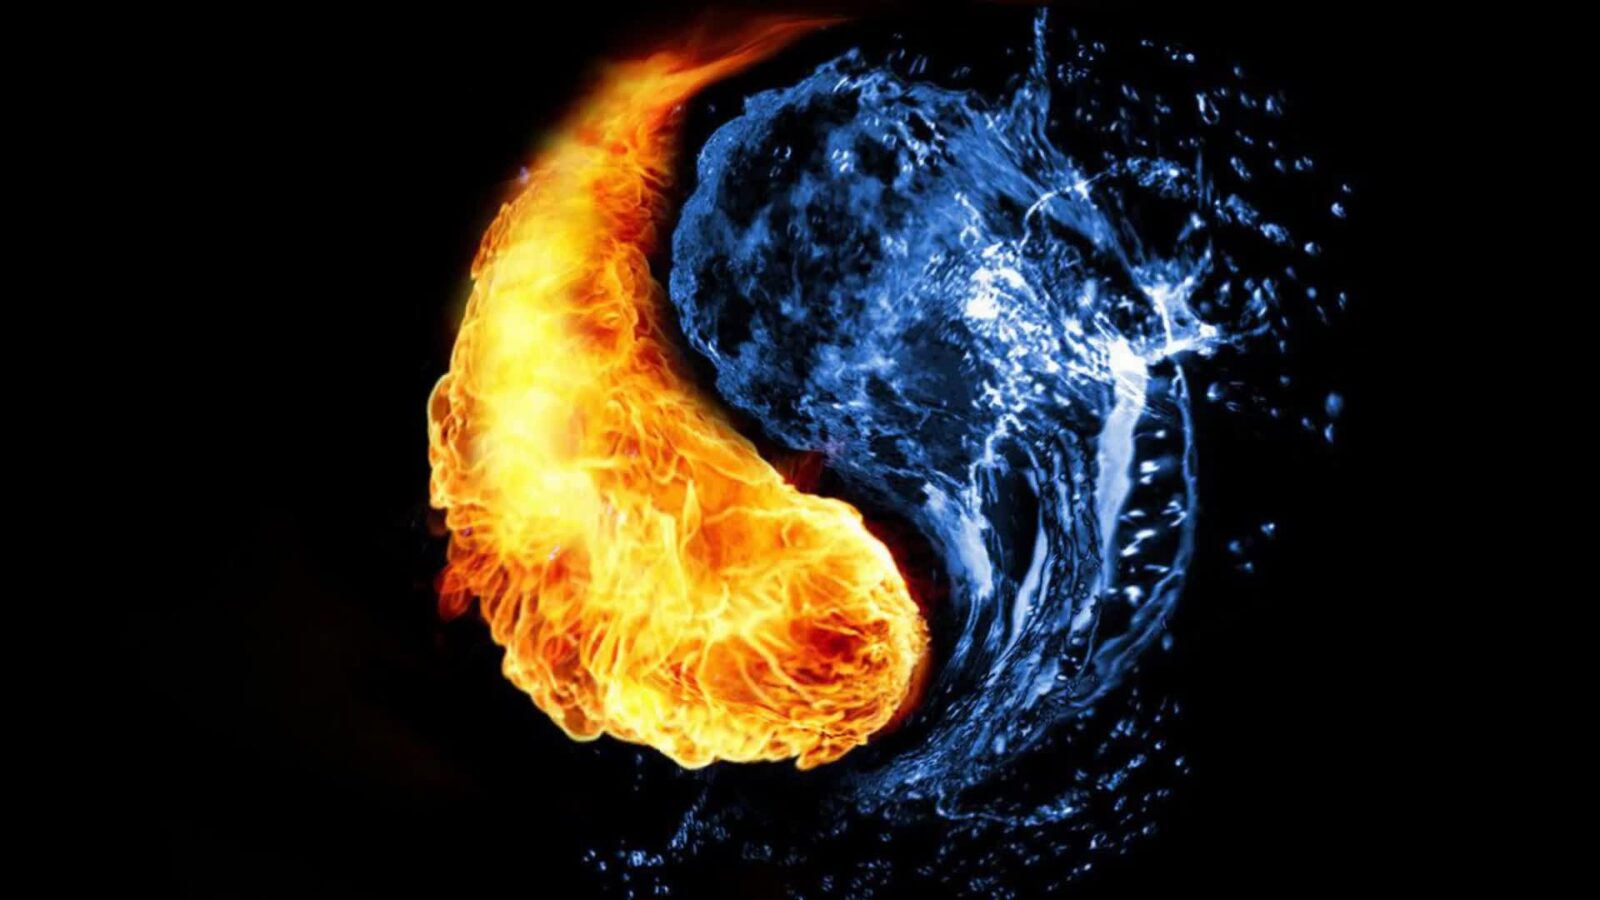 Flame And Water Ying Yang Abstract - Animated Live Wallpaper - Live